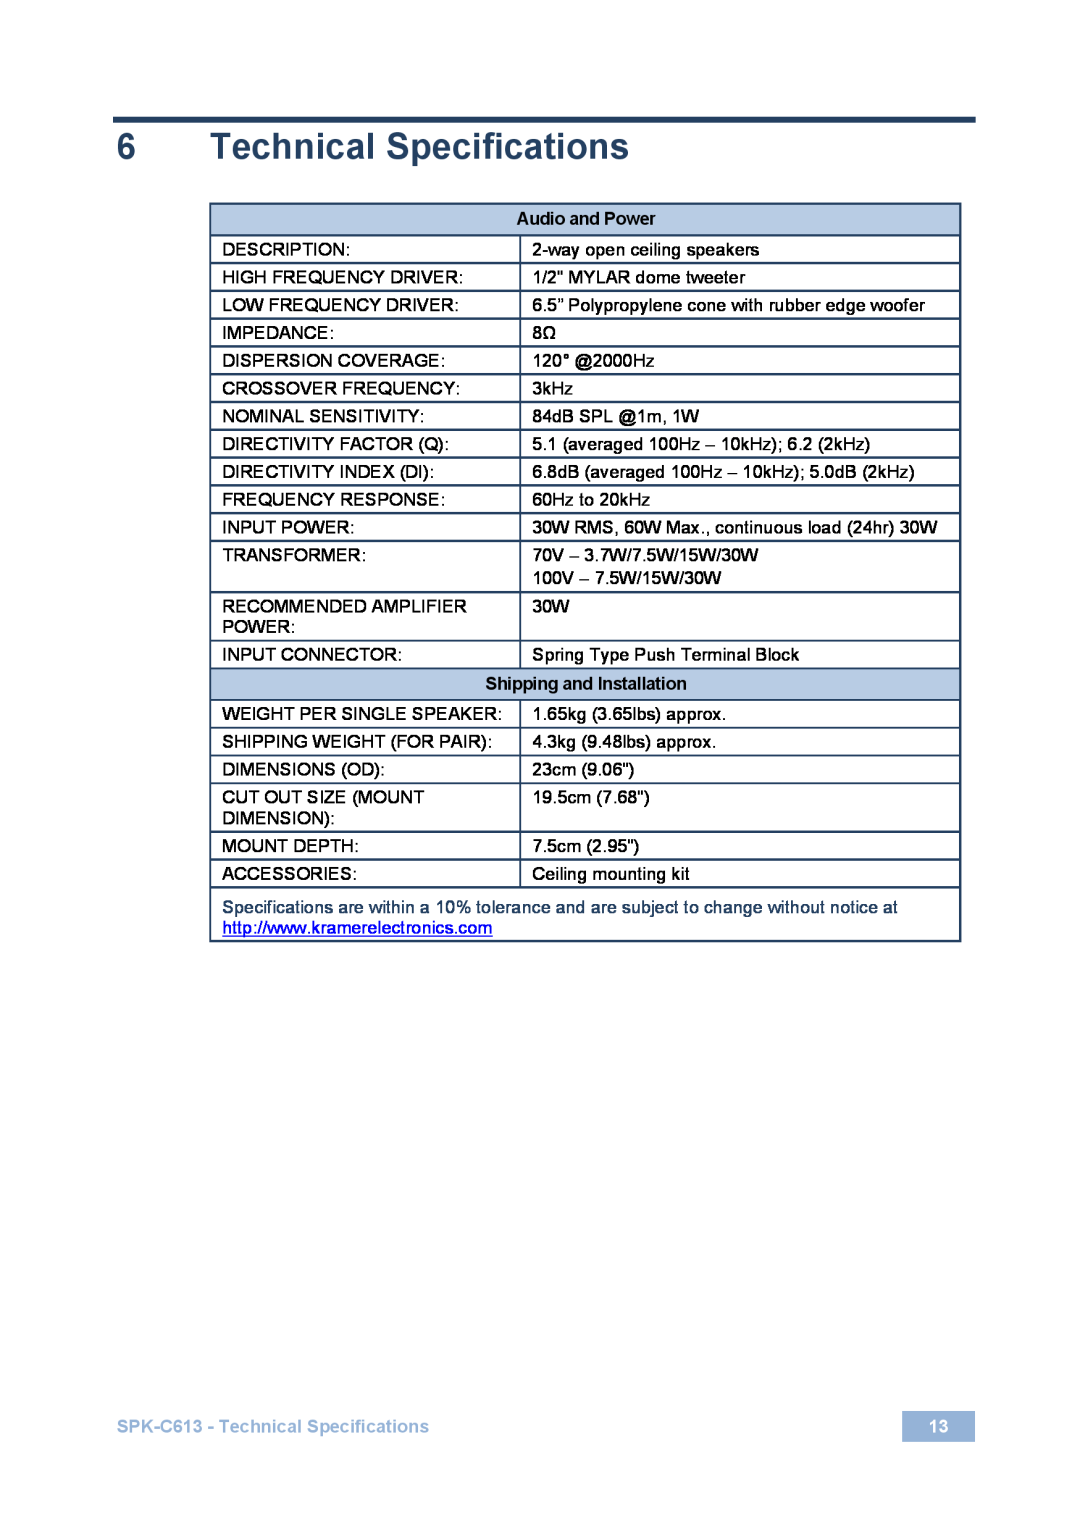 Kramer Electronics user manual Audio and Power, SPK-C613- Technical Specifications 